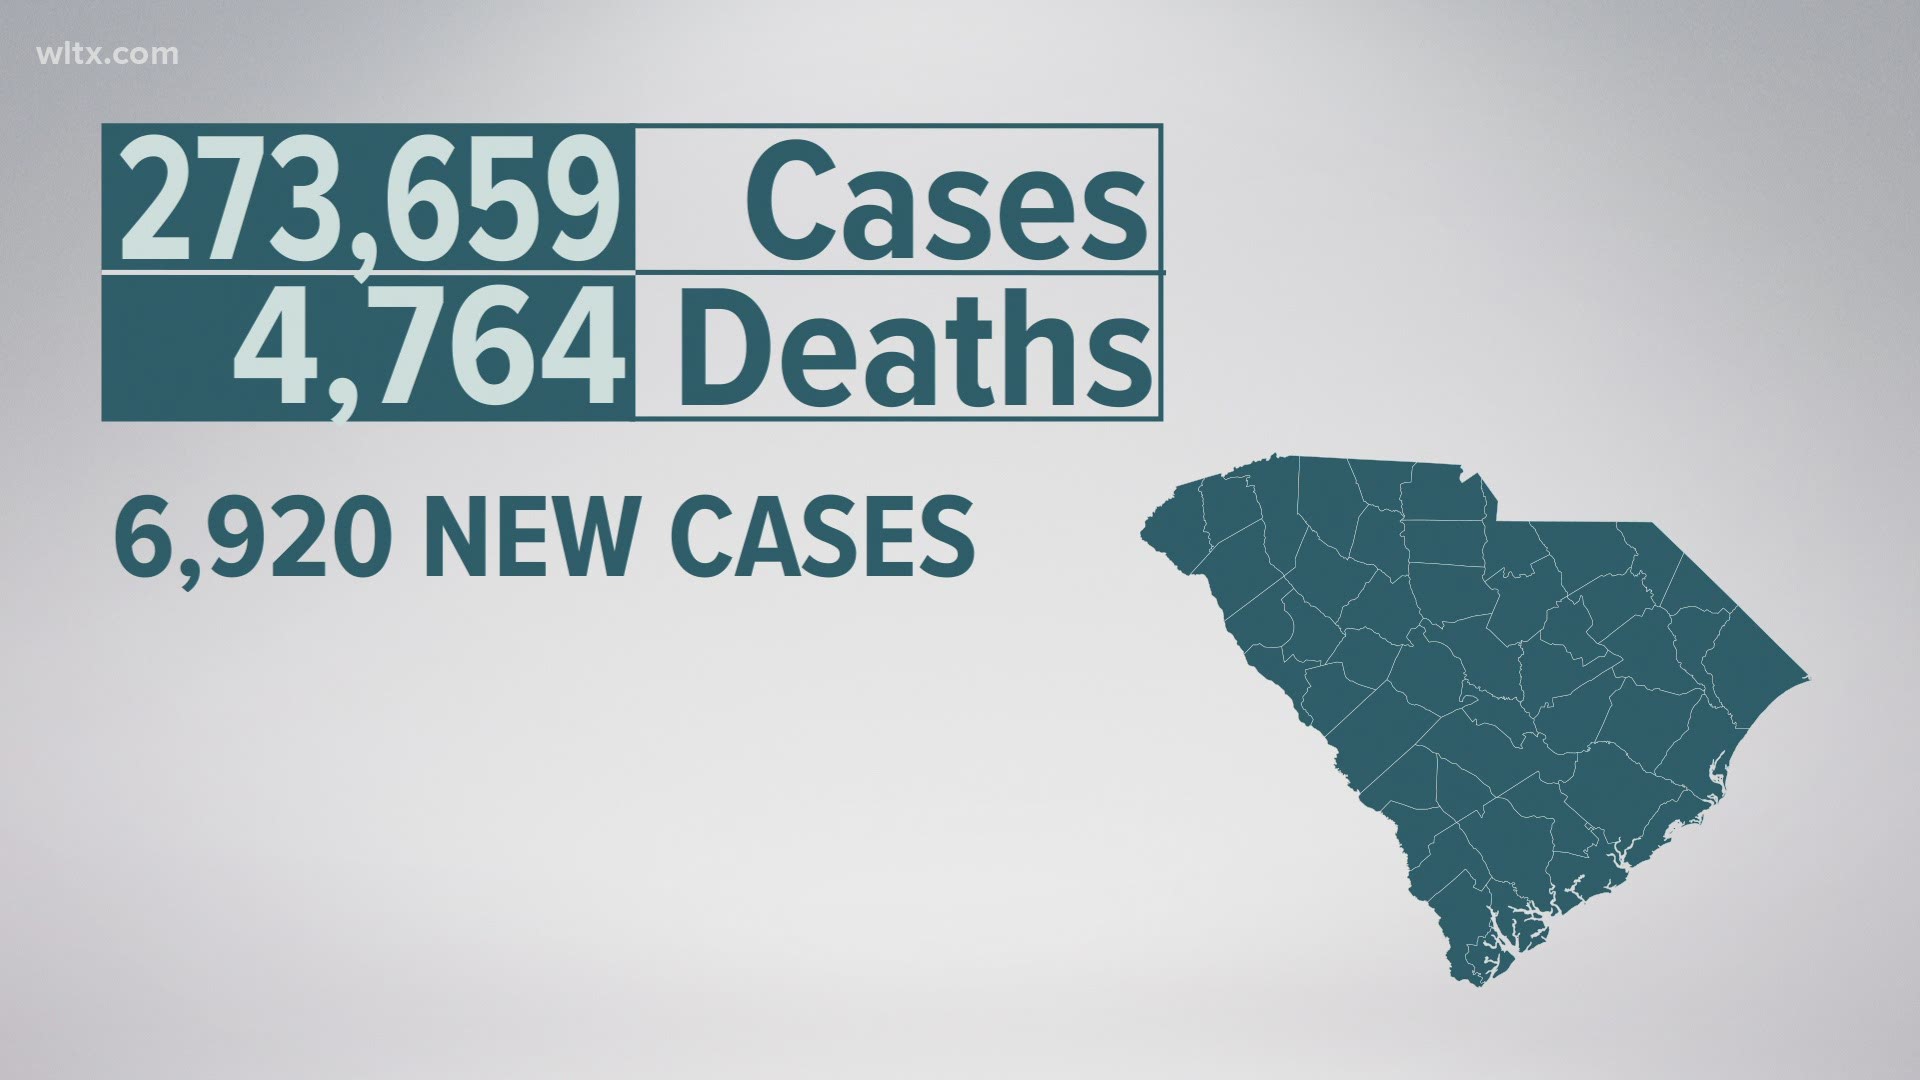 The two-day holiday total for Christmas Eve and Christmas Day is 6,920 new confirmed cases and 28 additional deaths.